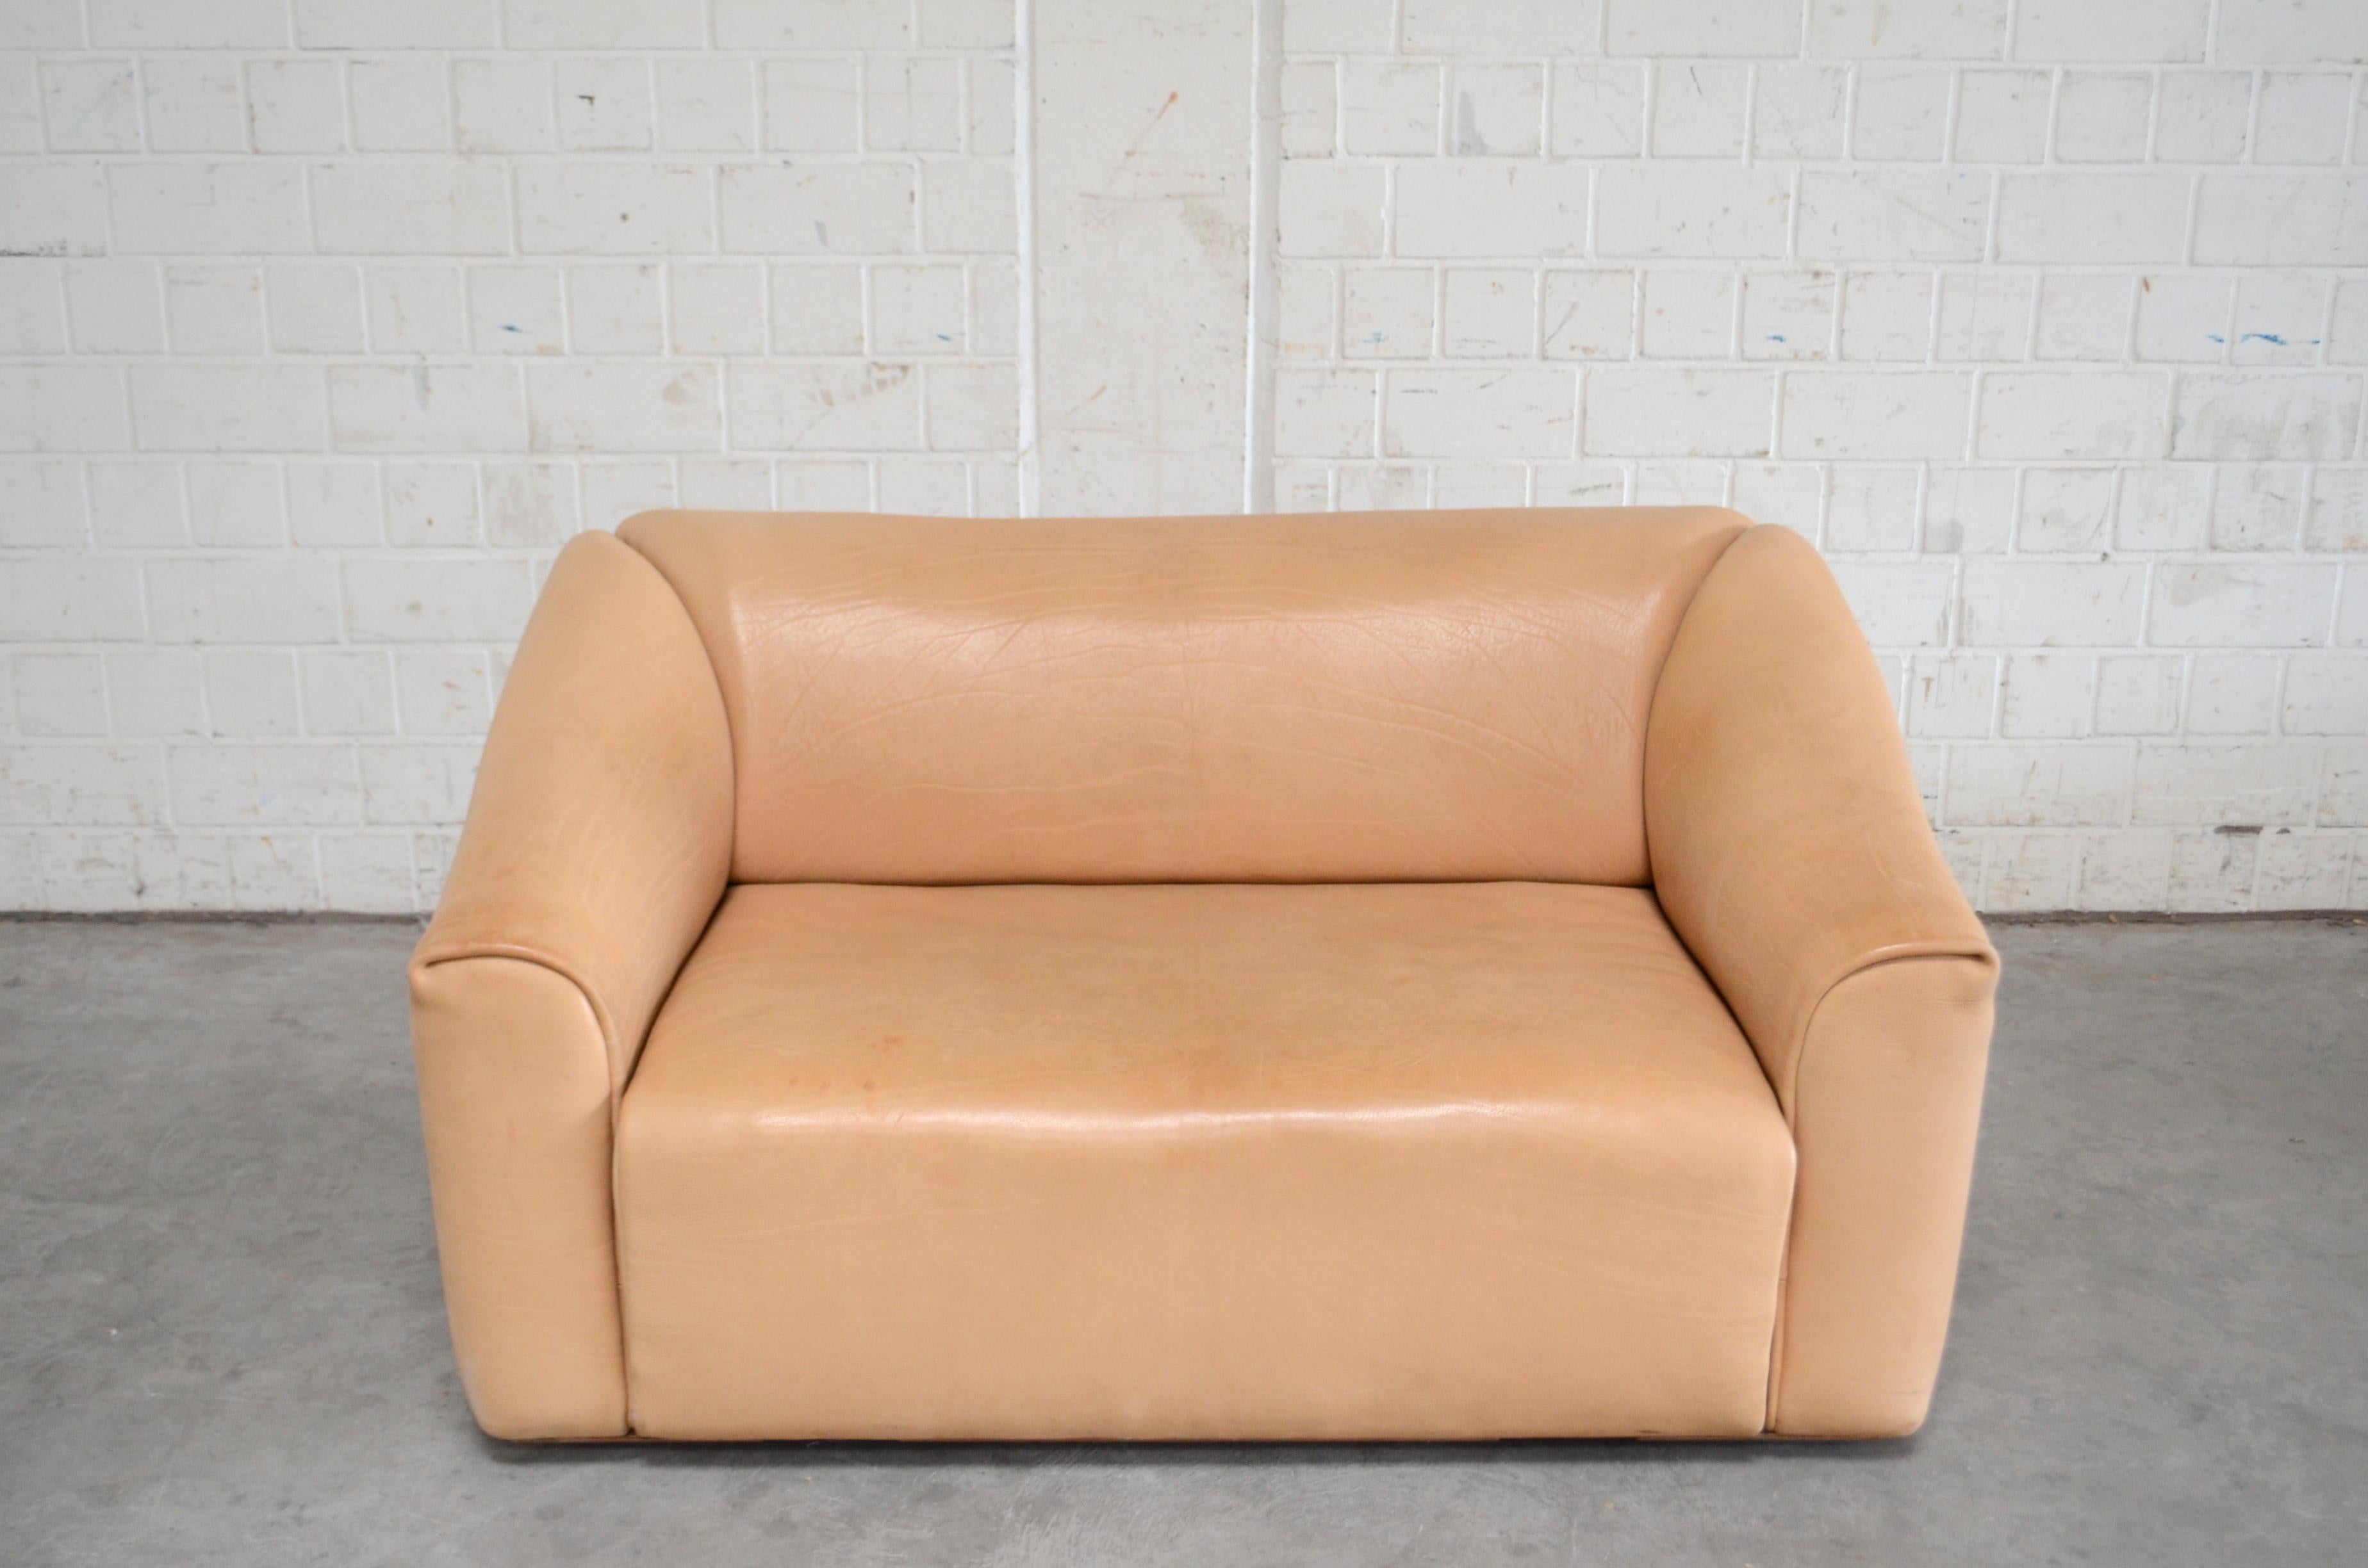 De Sede DS 47 / 02 neck leather sofa.
It´s the small loveseat Sofa.
This DS-47 sofa was manufactured in Switzerland by De Sede and is upholstered in 3-5 mm thick, natural hide.
The leather color is beautiful with name cocos.
The seat is